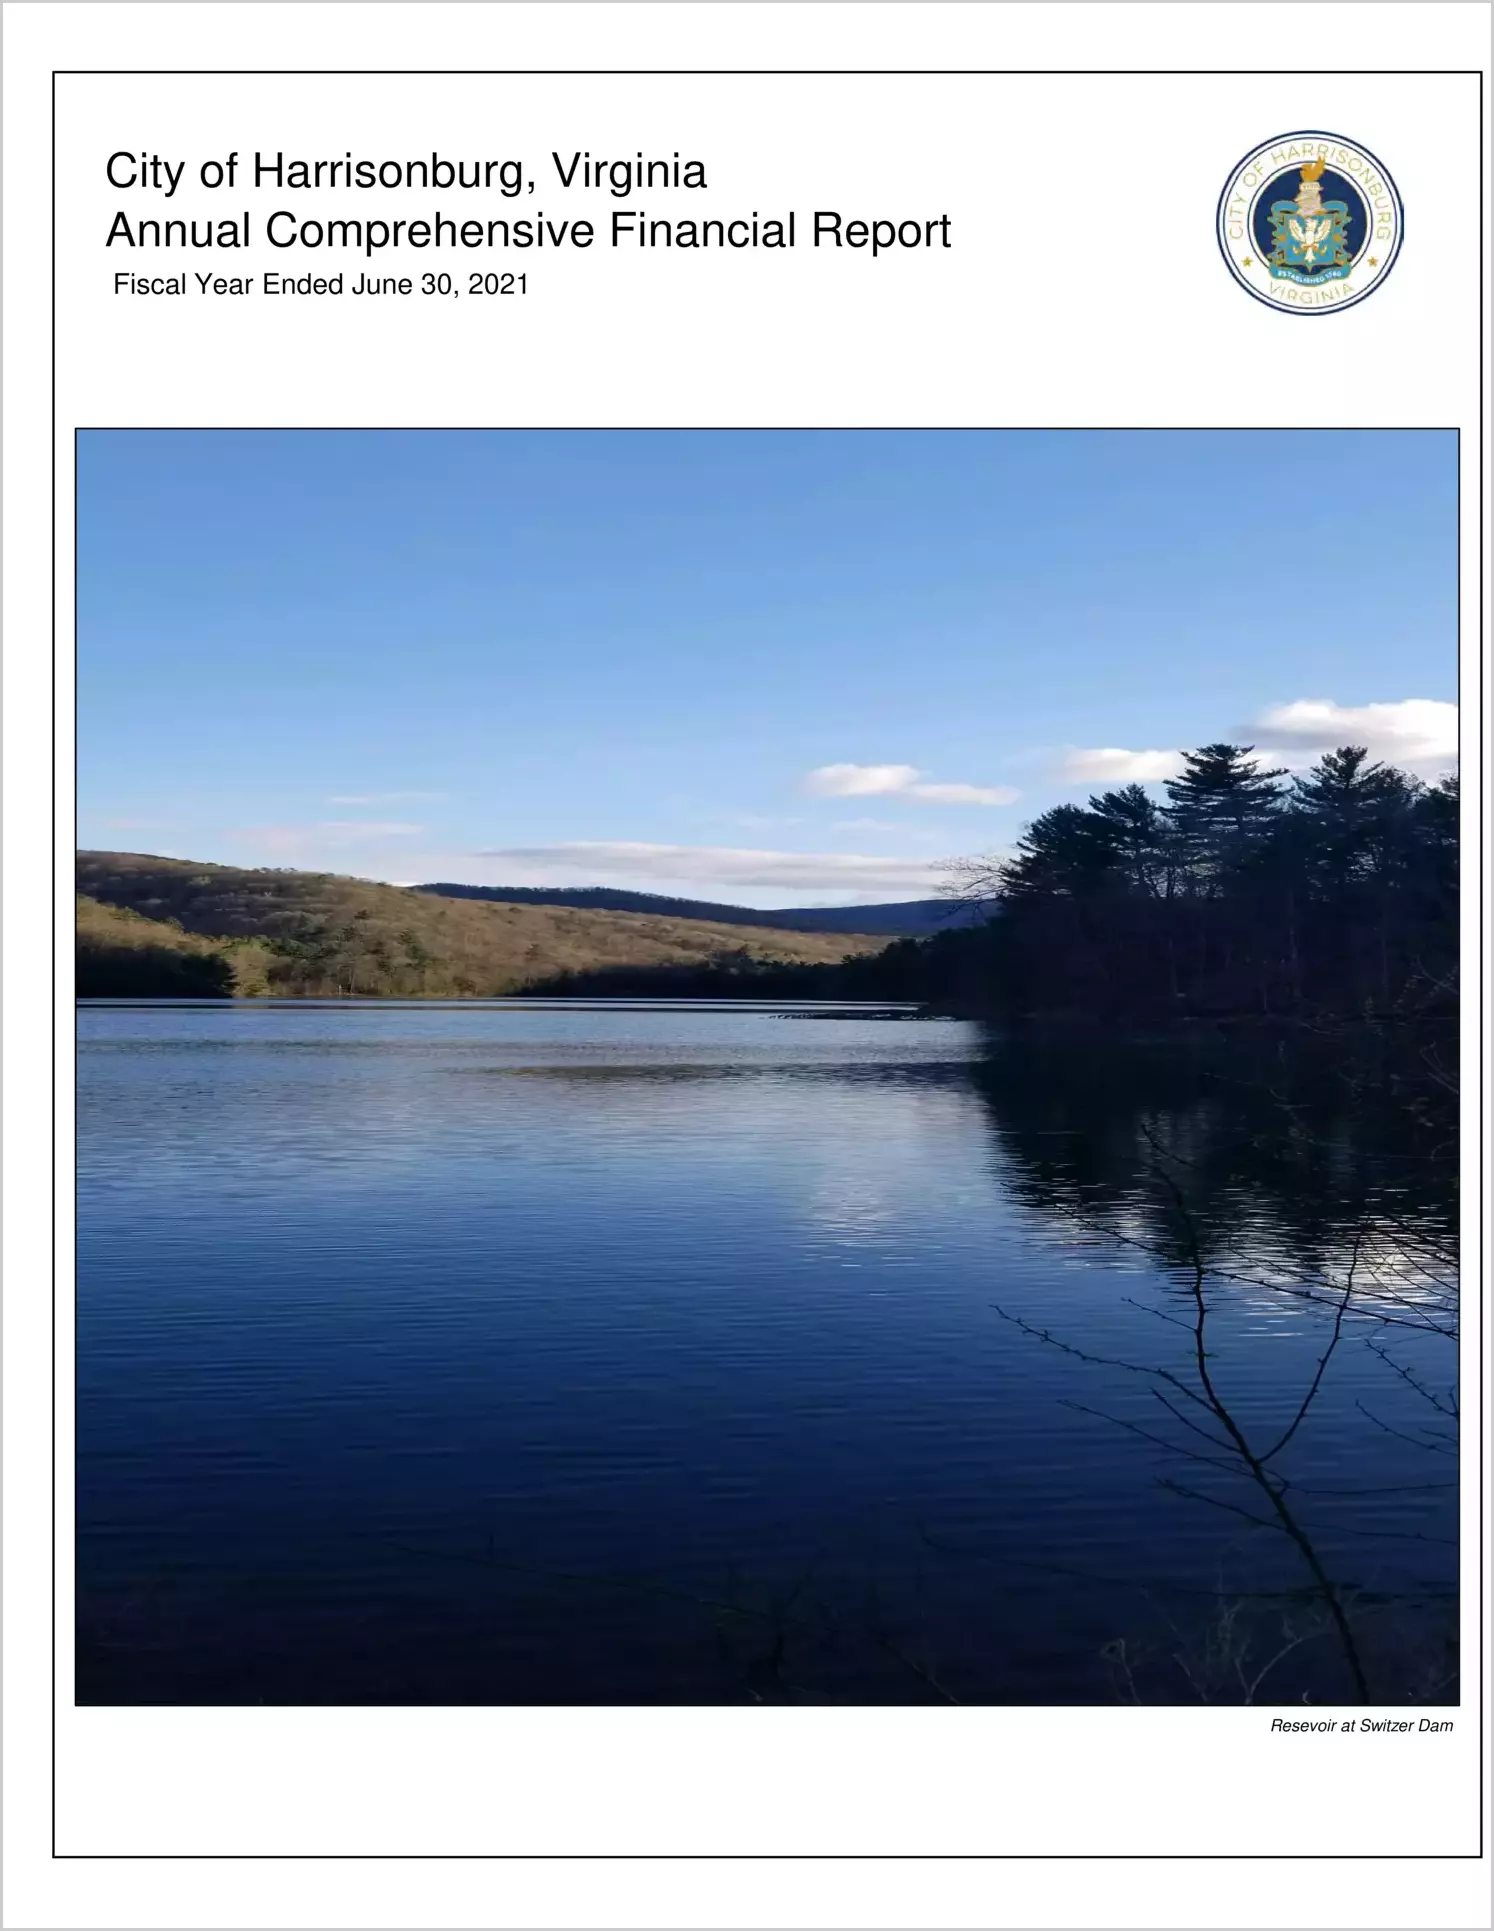 2021 Annual Financial Report for City of Harrisonburg